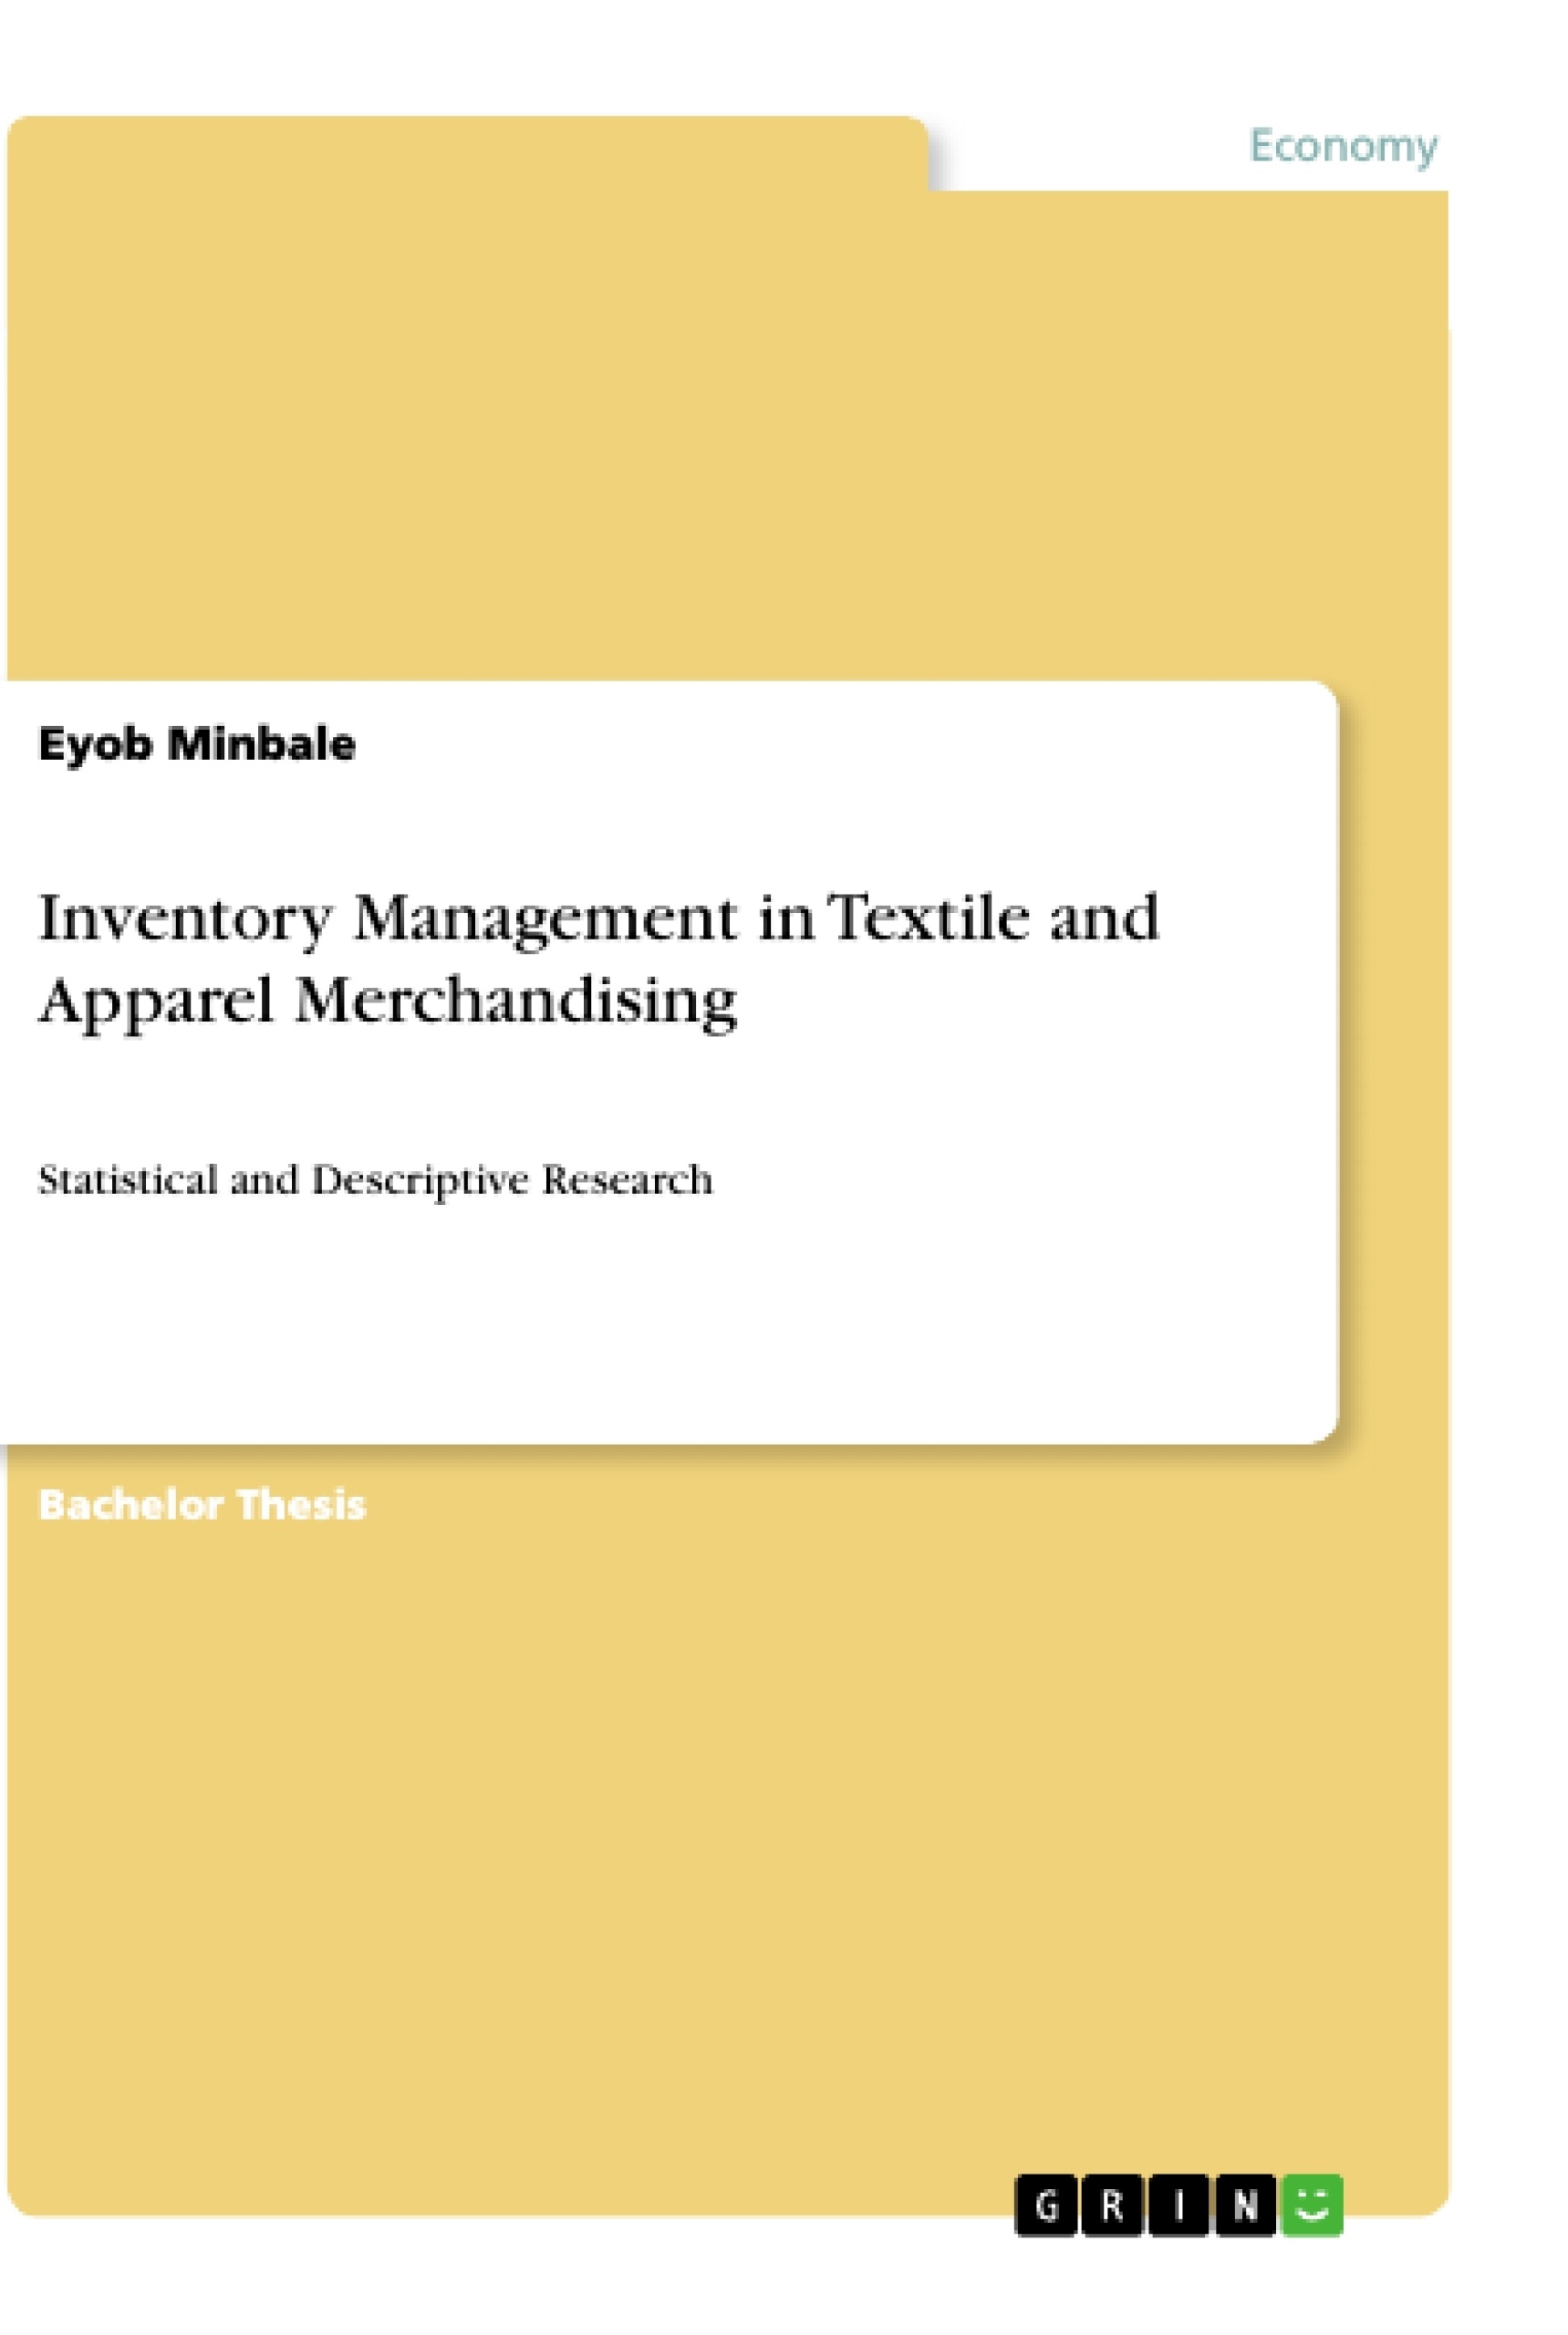 Title: Inventory Management in Textile and Apparel Merchandising